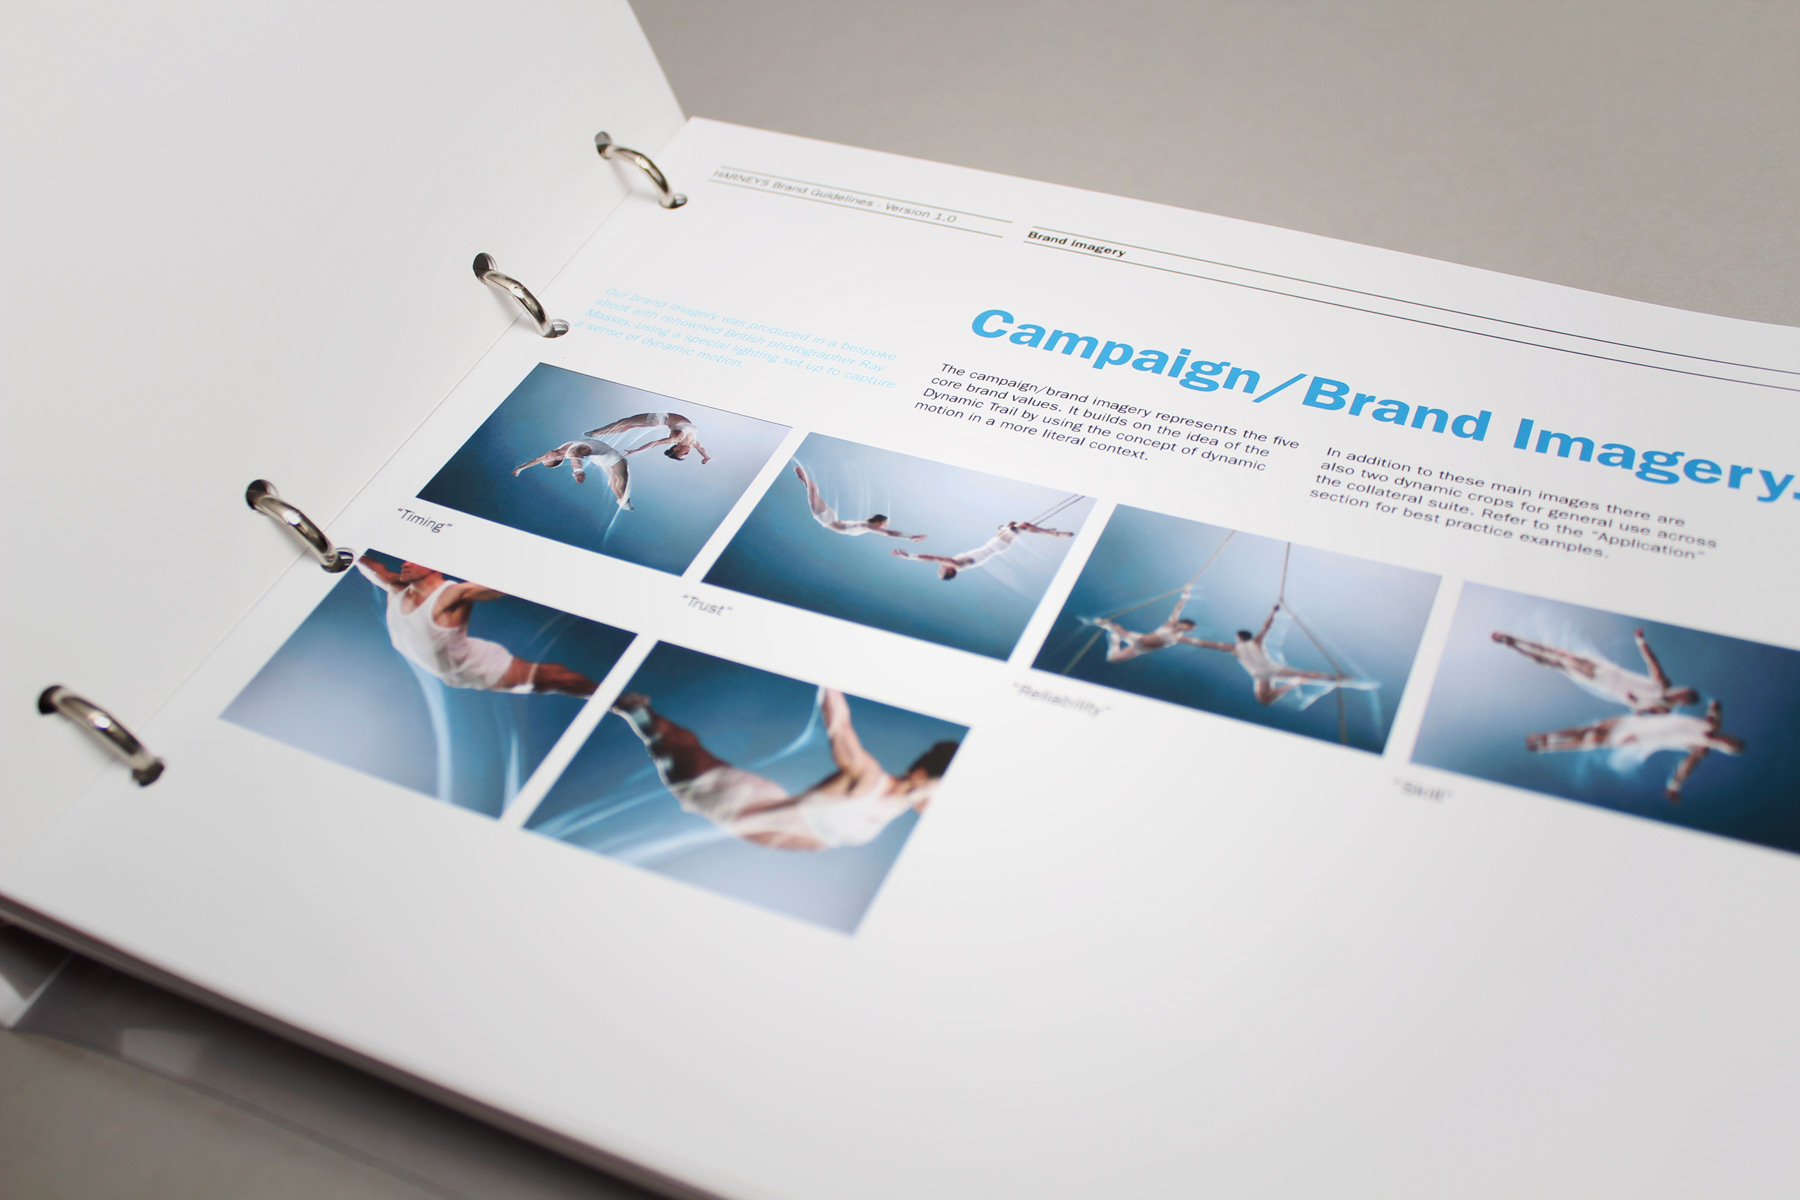 The suite of brand images captured the business values - Timing, Trust, Reliability, Skill.